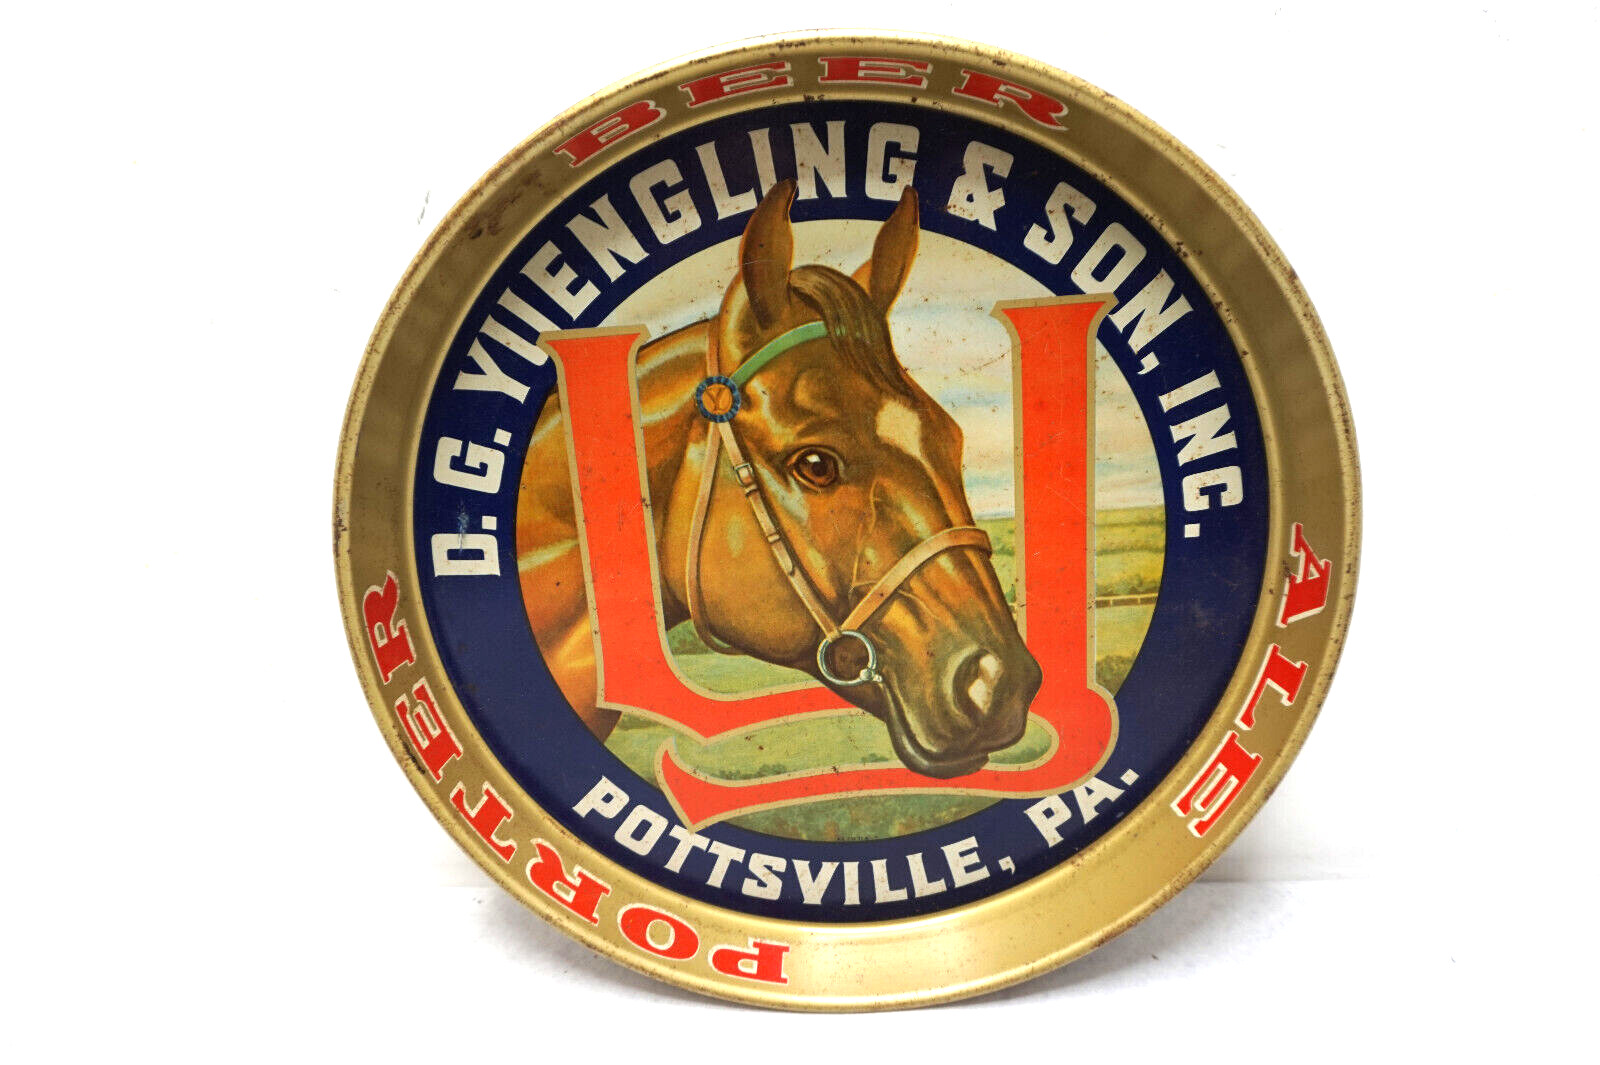 ANTIQUE PORTER BEER TRAY DG YUENGLING SON POTTSVILLE PA ALE PORTER 1940s HORSE